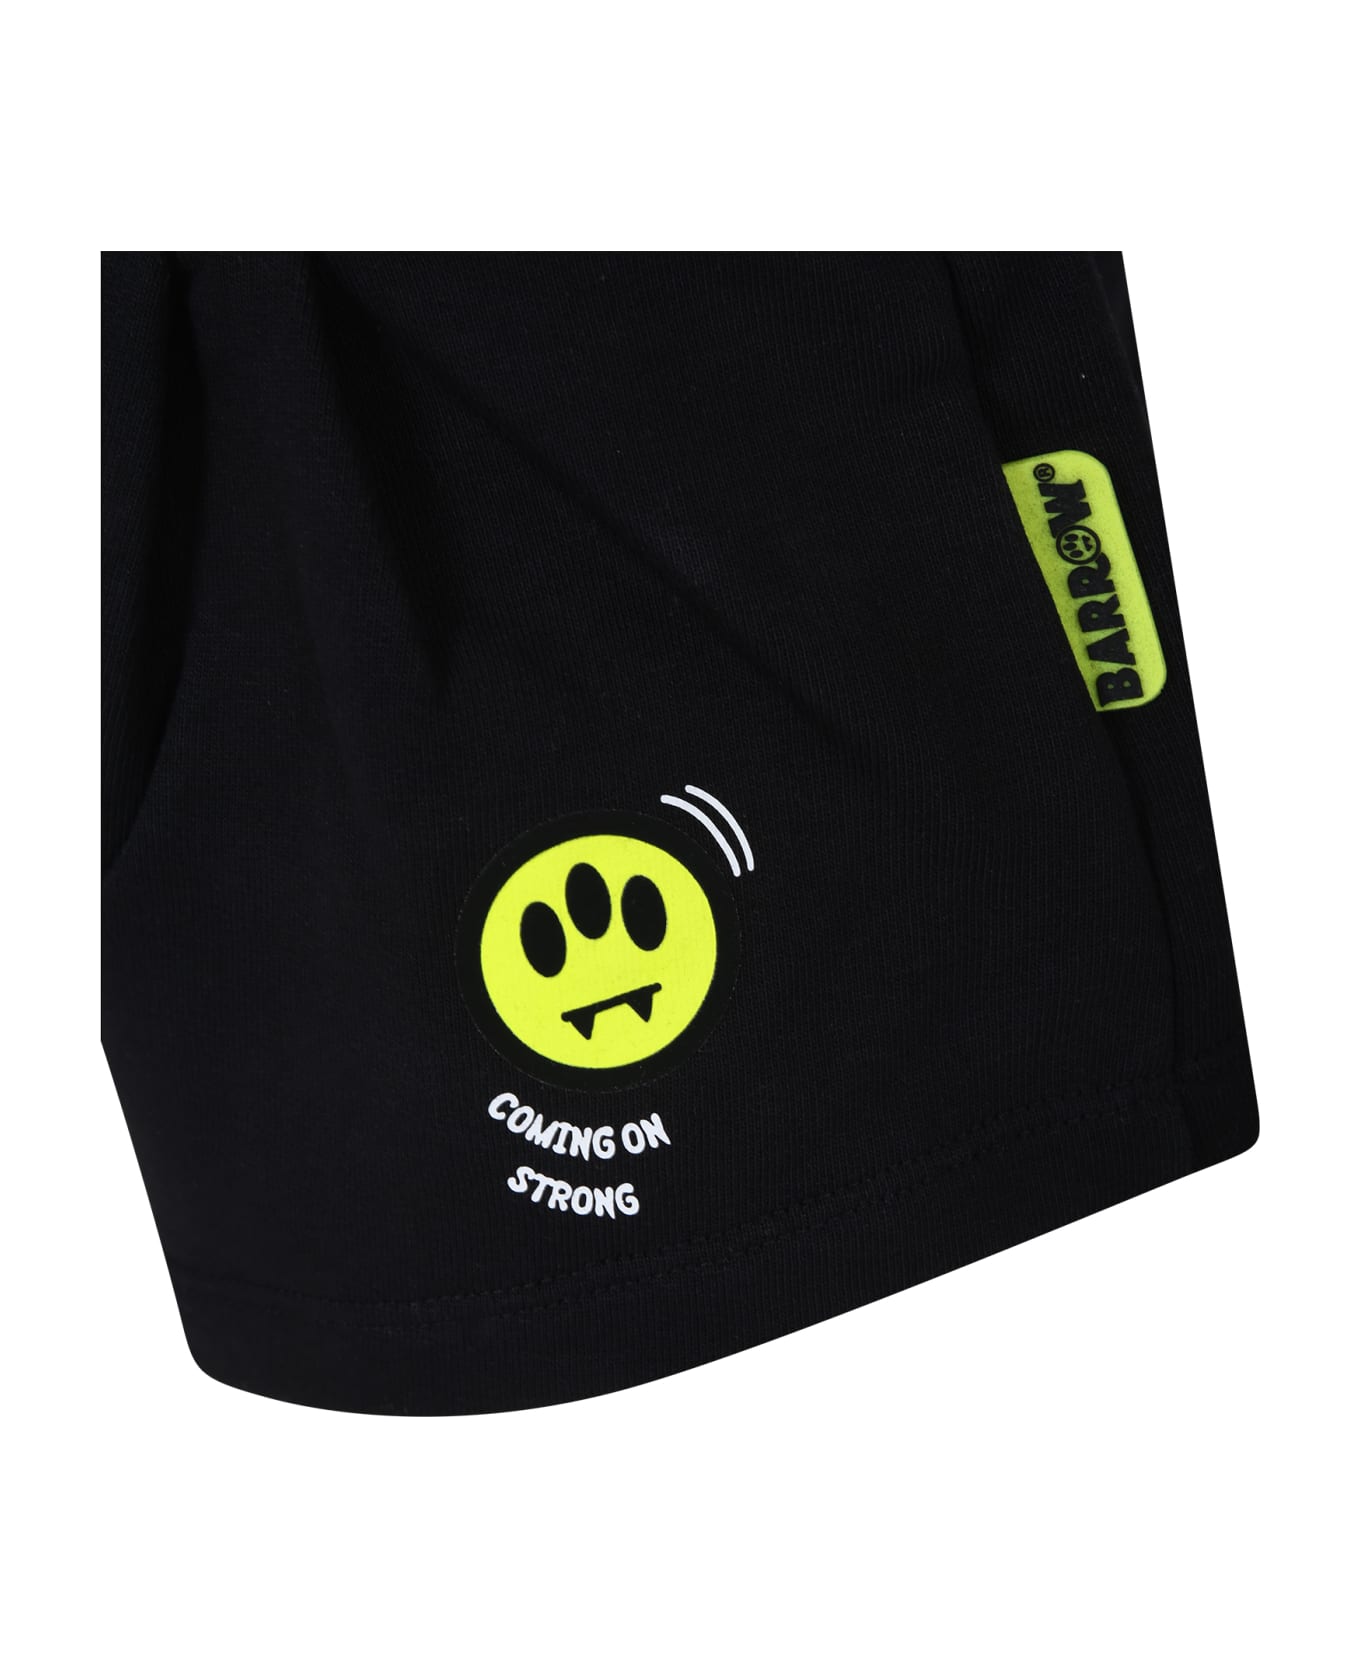 Barrow Black Shorts For Girl With Smiley Faces - Black